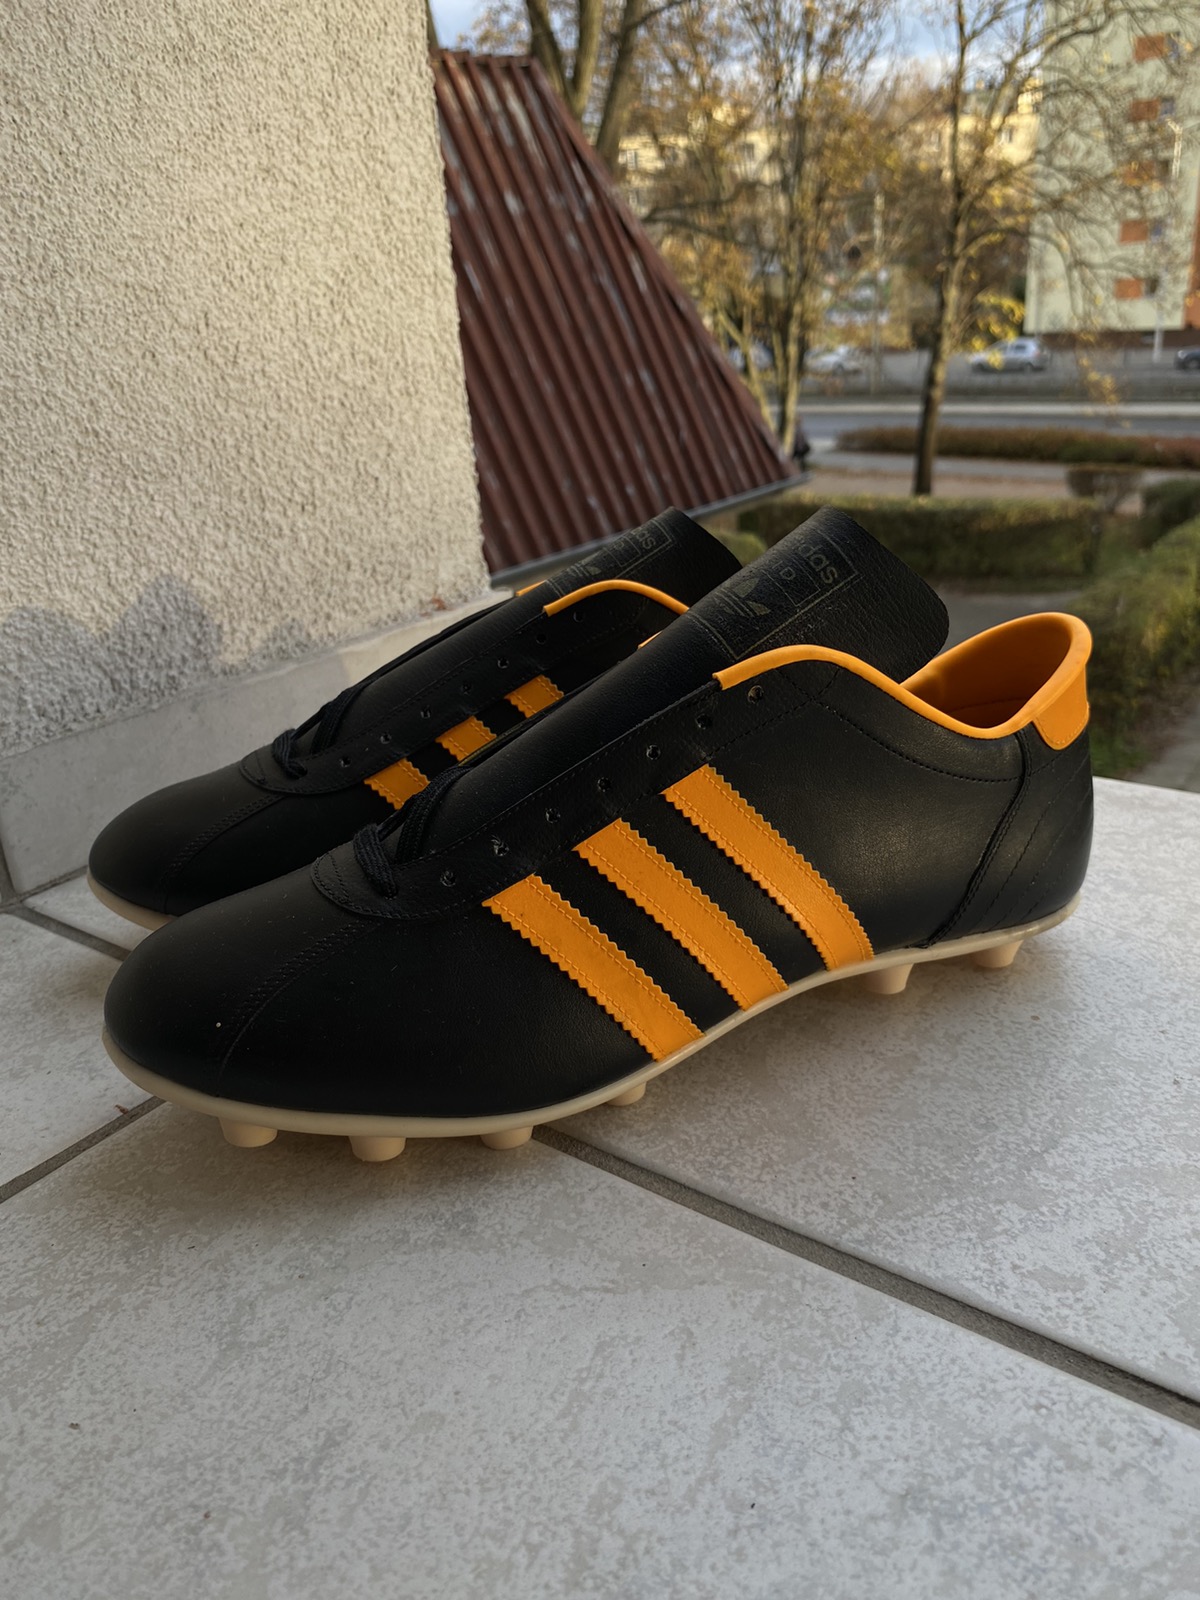 Adidas Kid made in France 70-80s football boots - 3